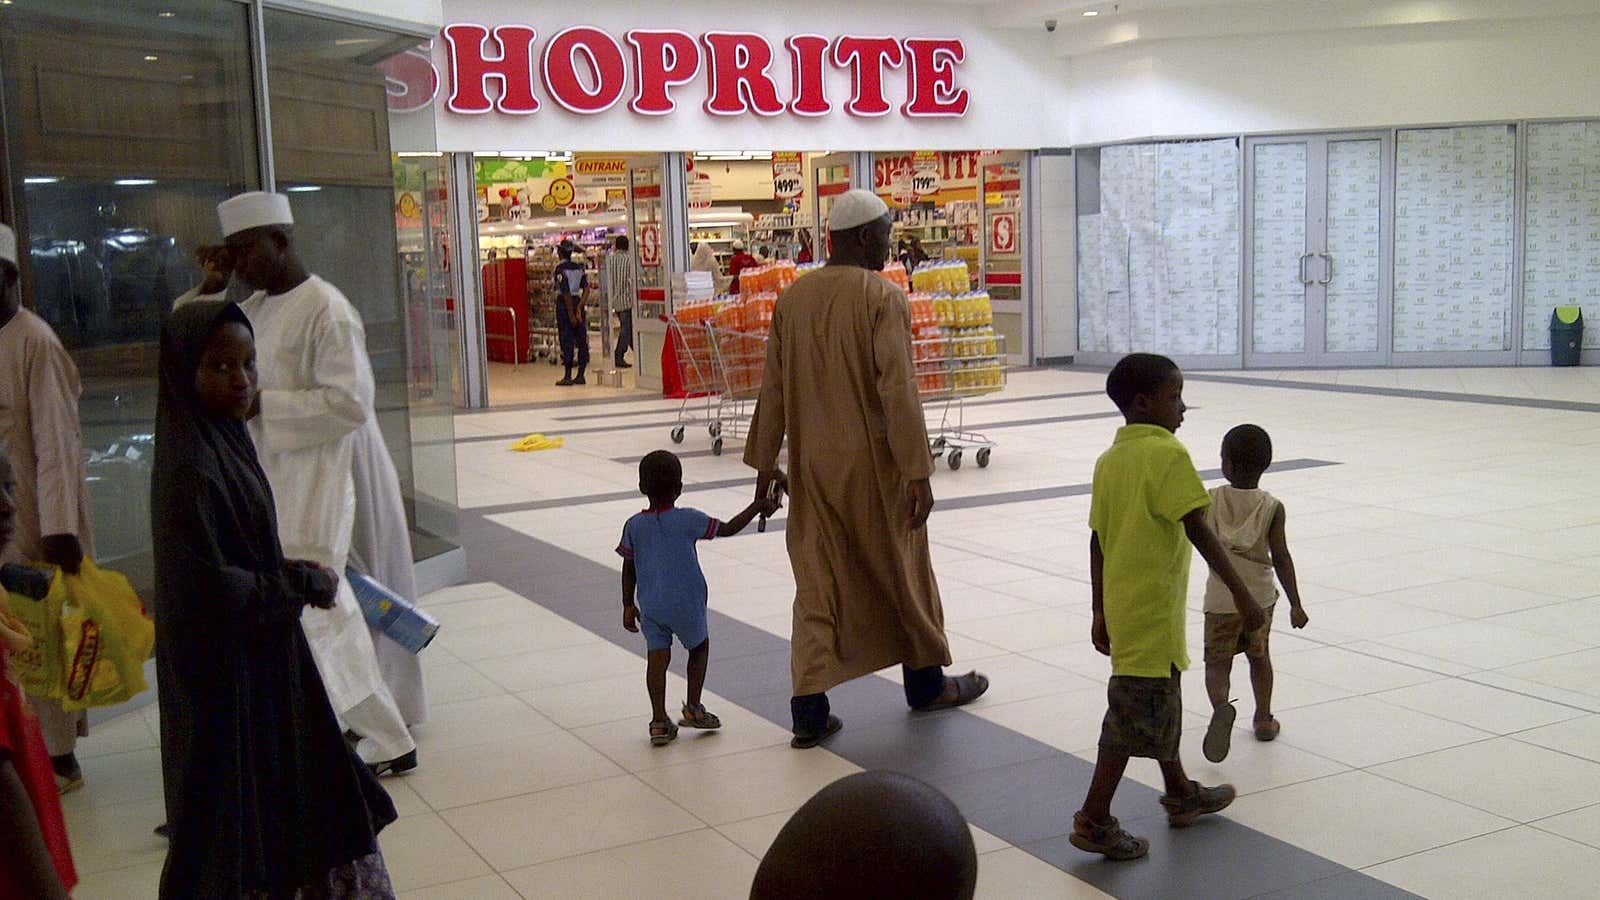 Shoprite’s outlet in Kano, northern Nigeria